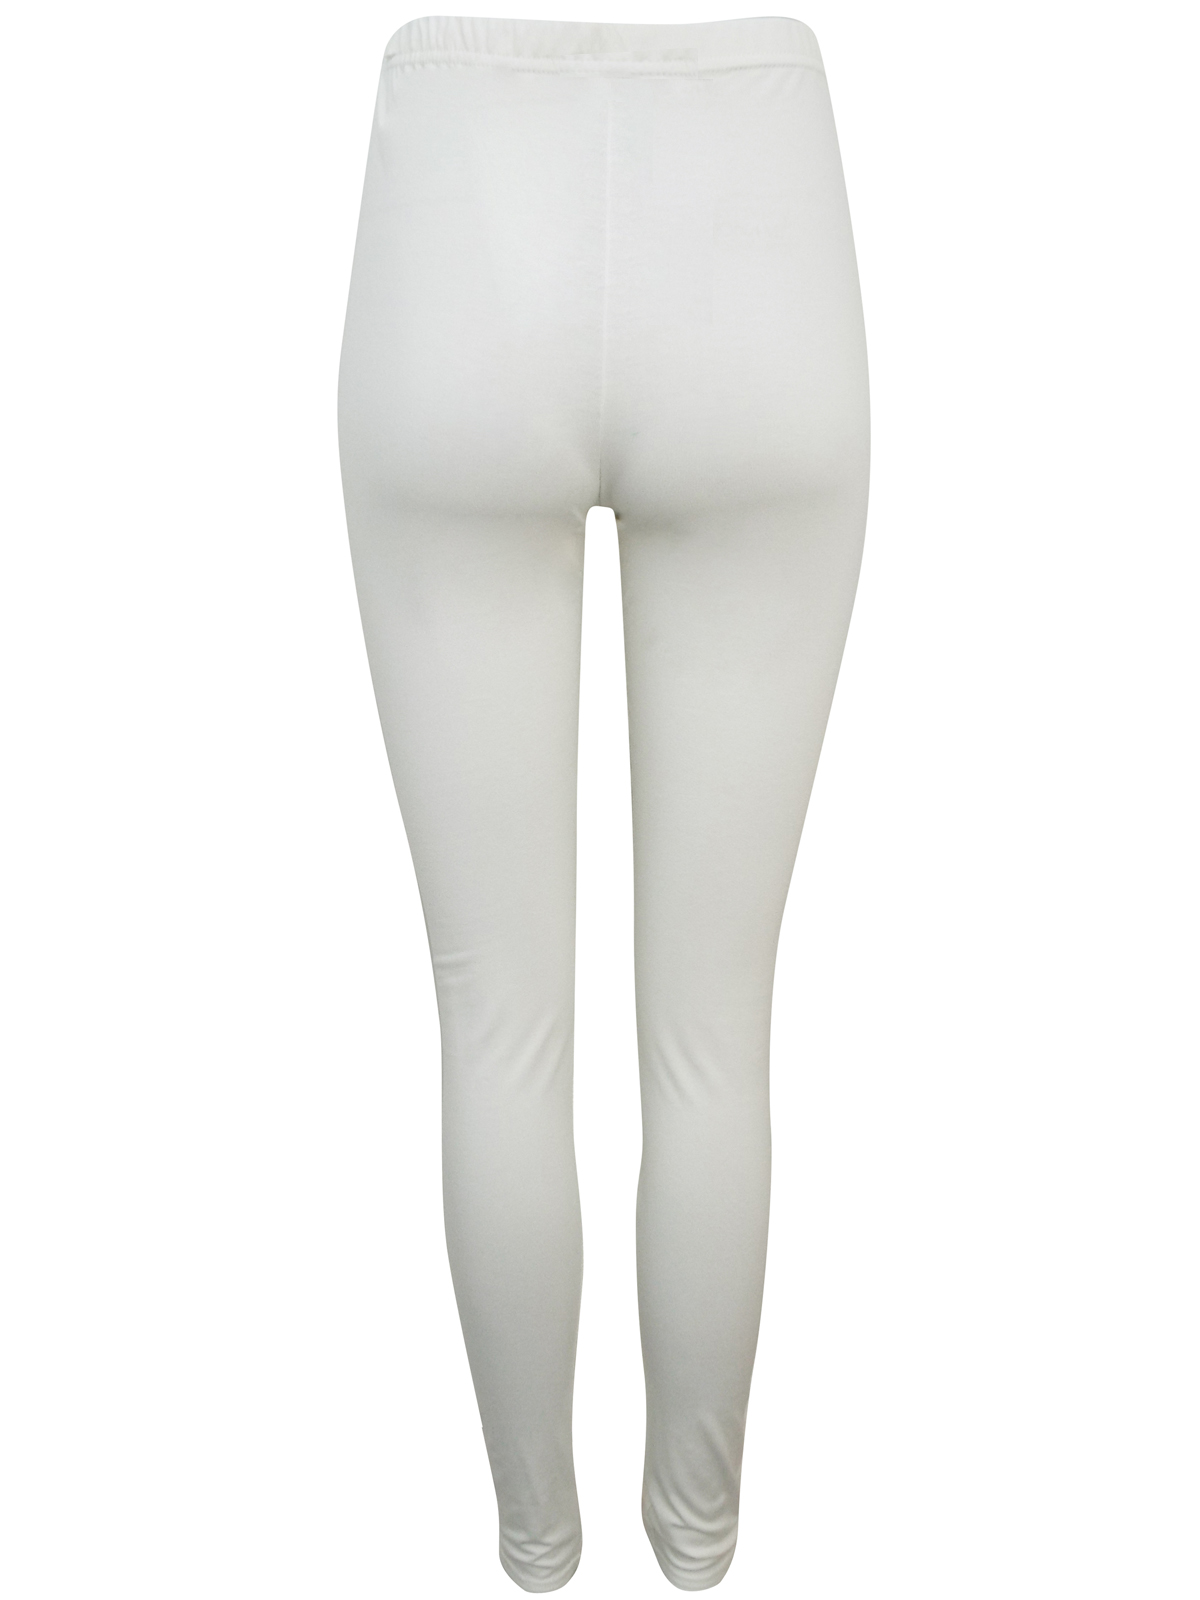 First Avenue WHITE Full Length Jersey Leggings - Size 12 to 20